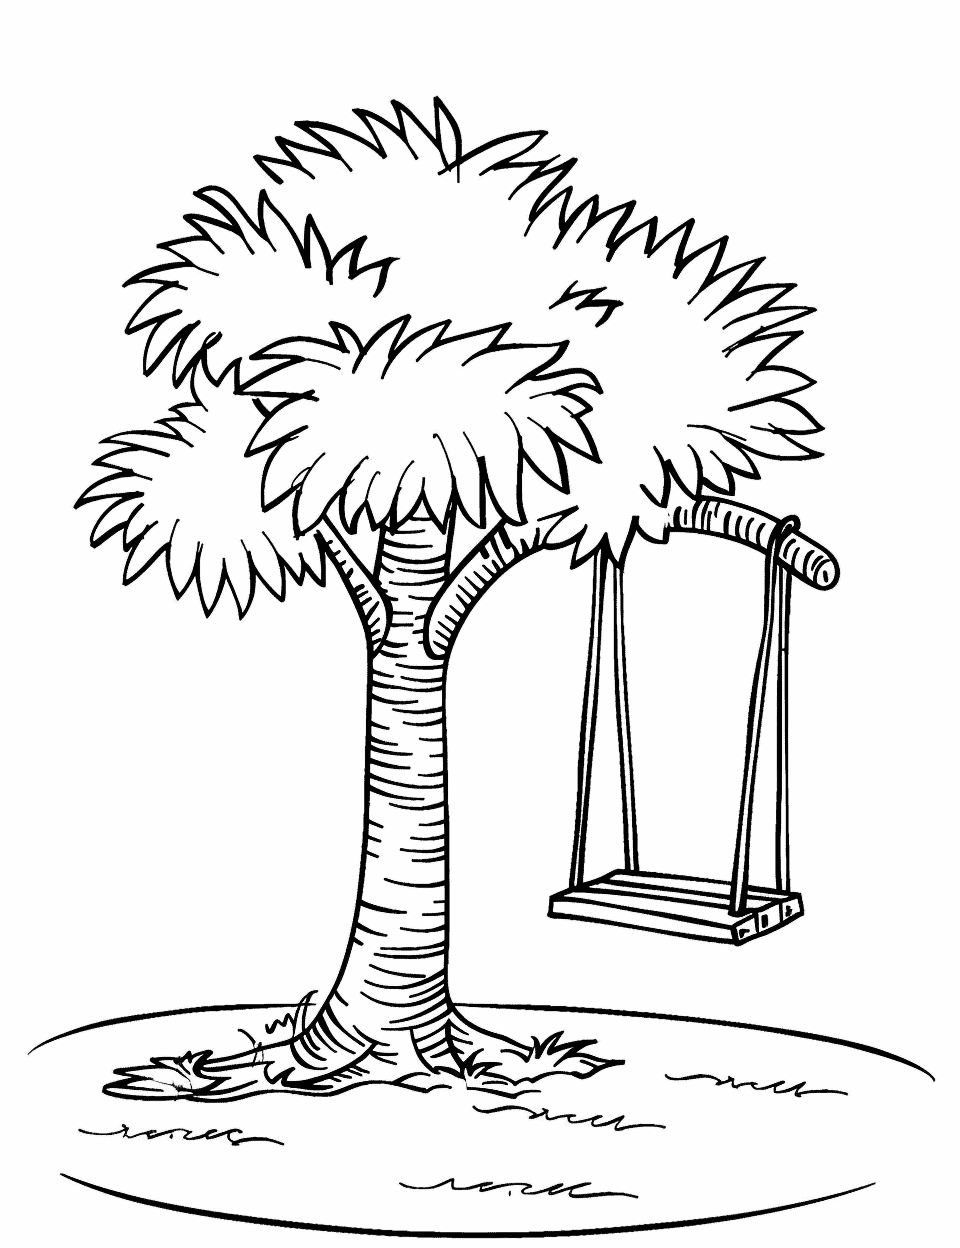 Tree with Swing Coloring Page - A sturdy tree with a wooden swing hanging from one of its branches.